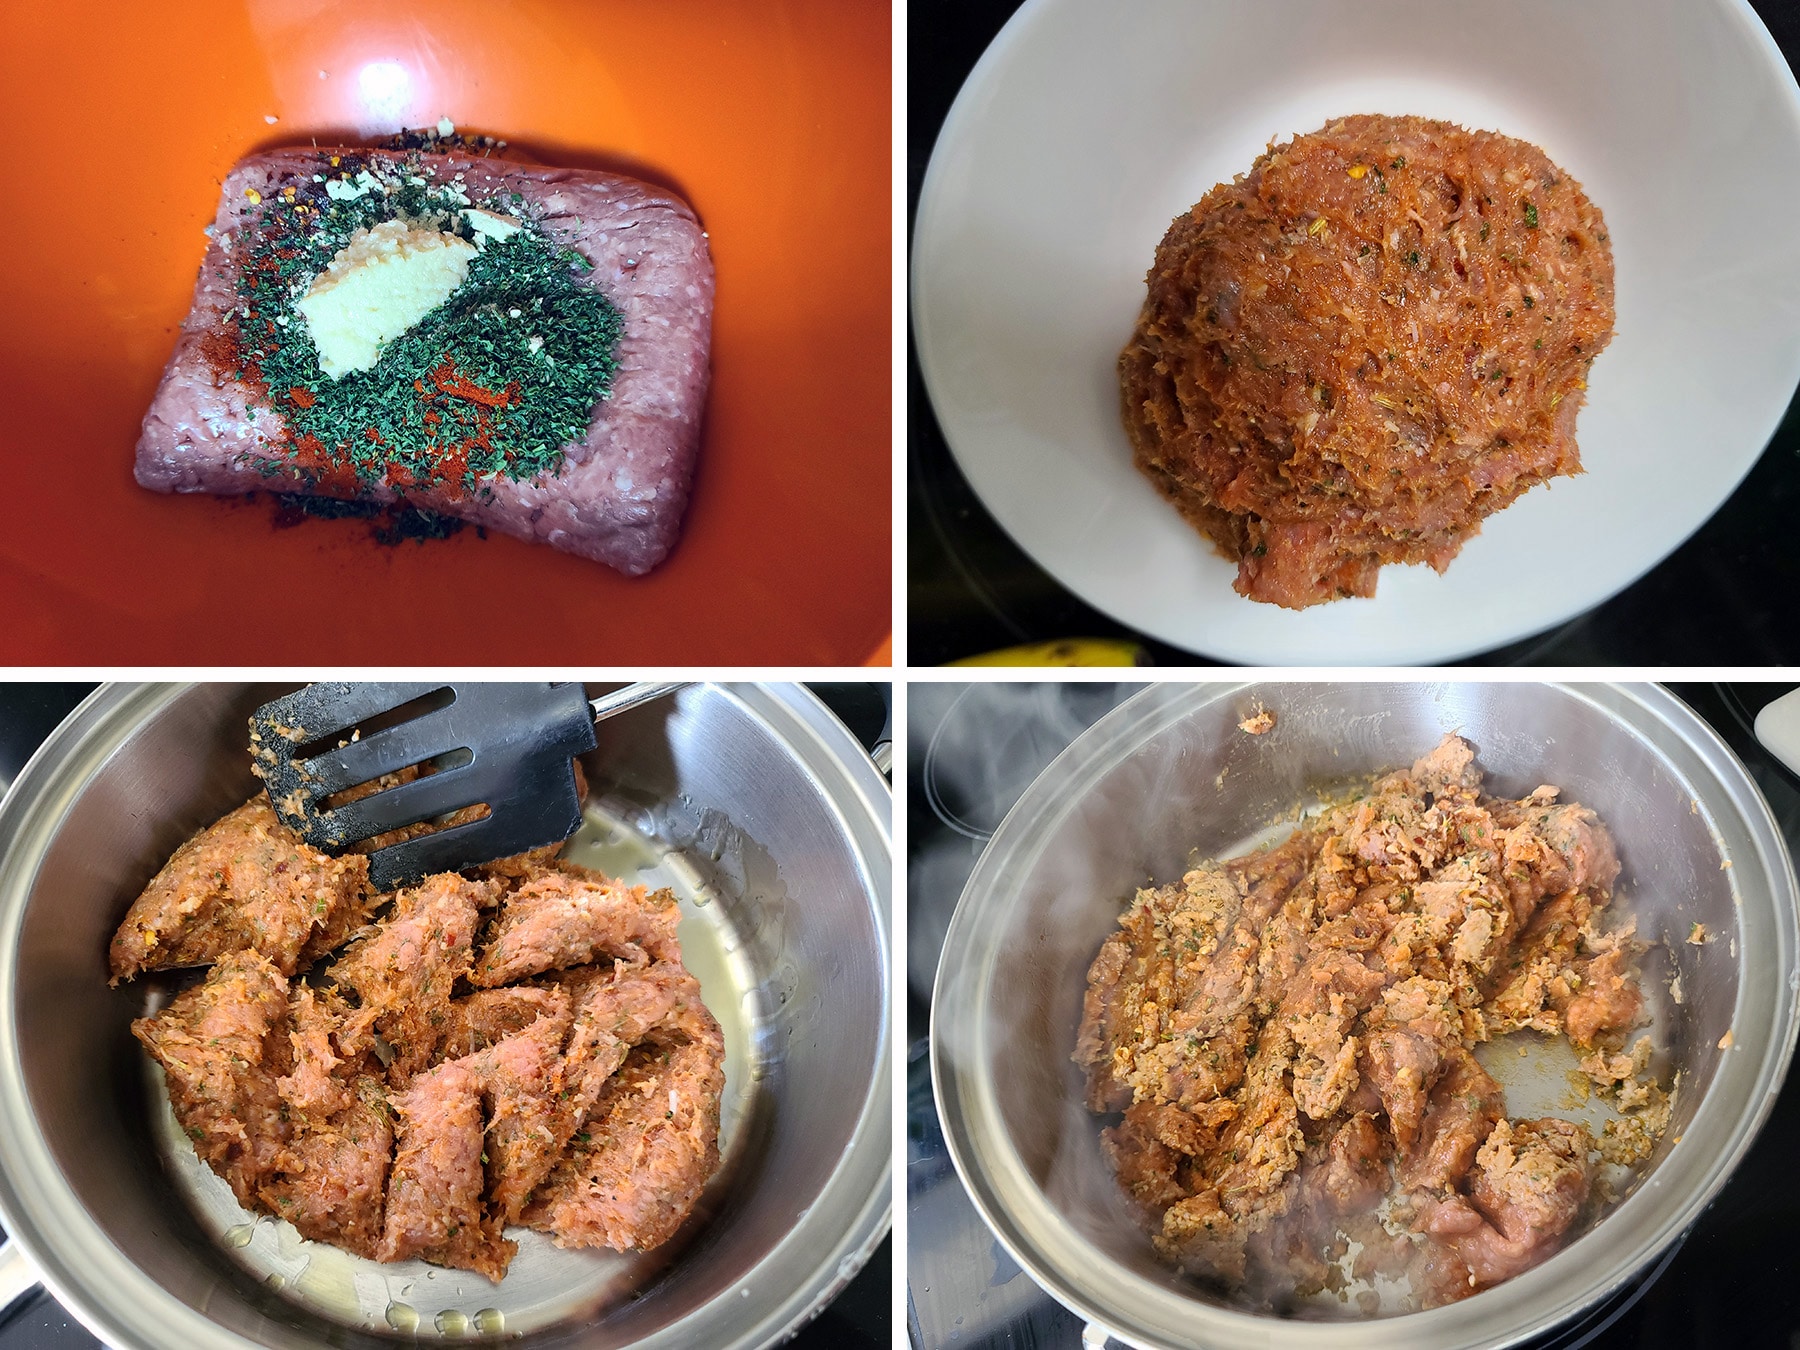 A 4 part image showing how to make an Italian Sausage substitute from ground chicken, as described.